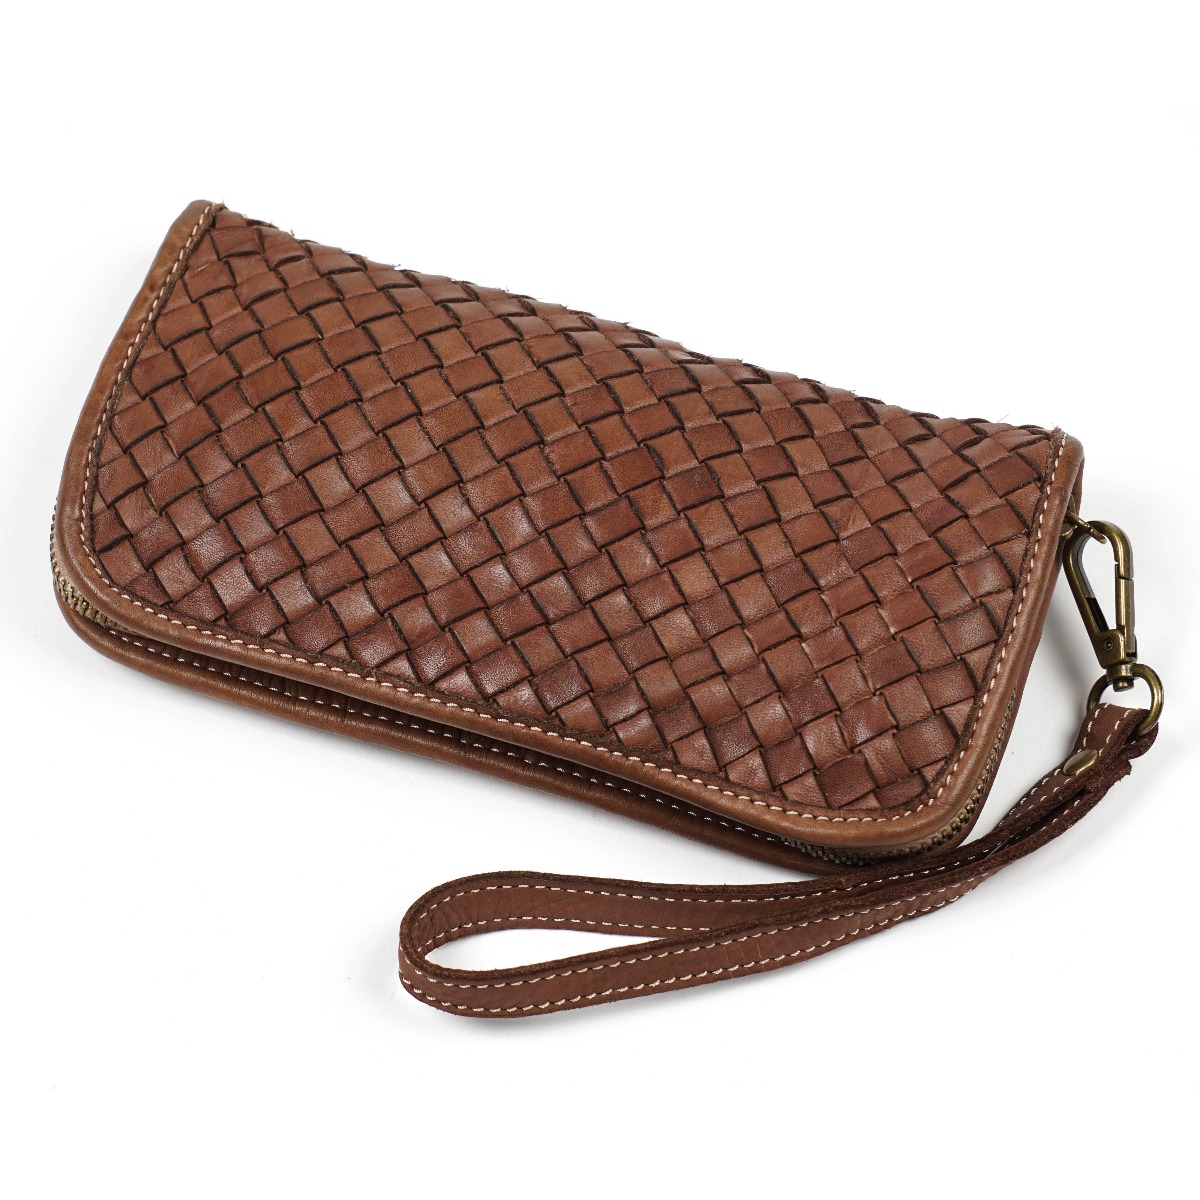 Woven leather women wallet - brown color